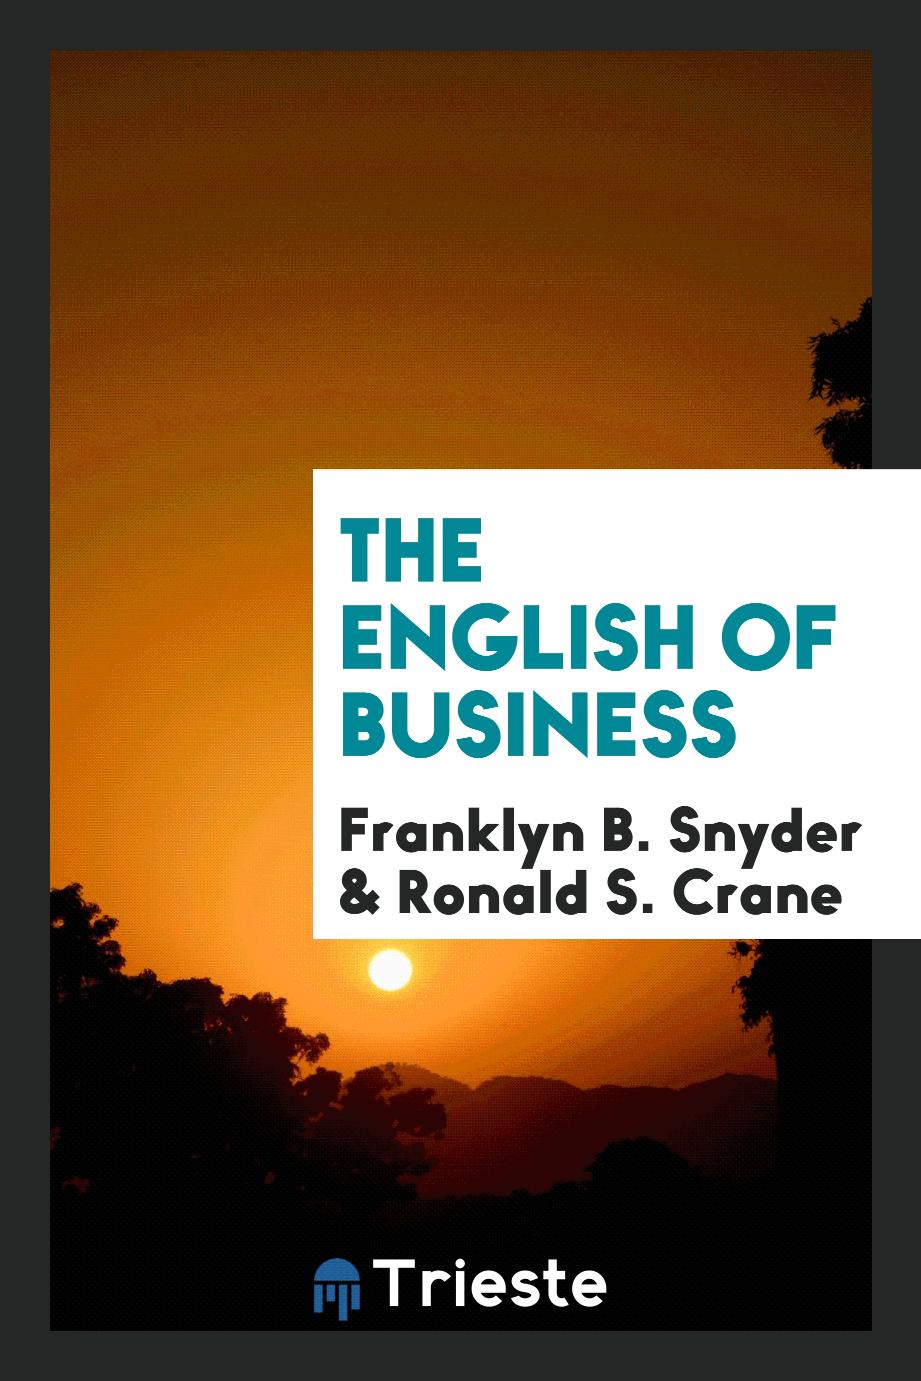 The English of business